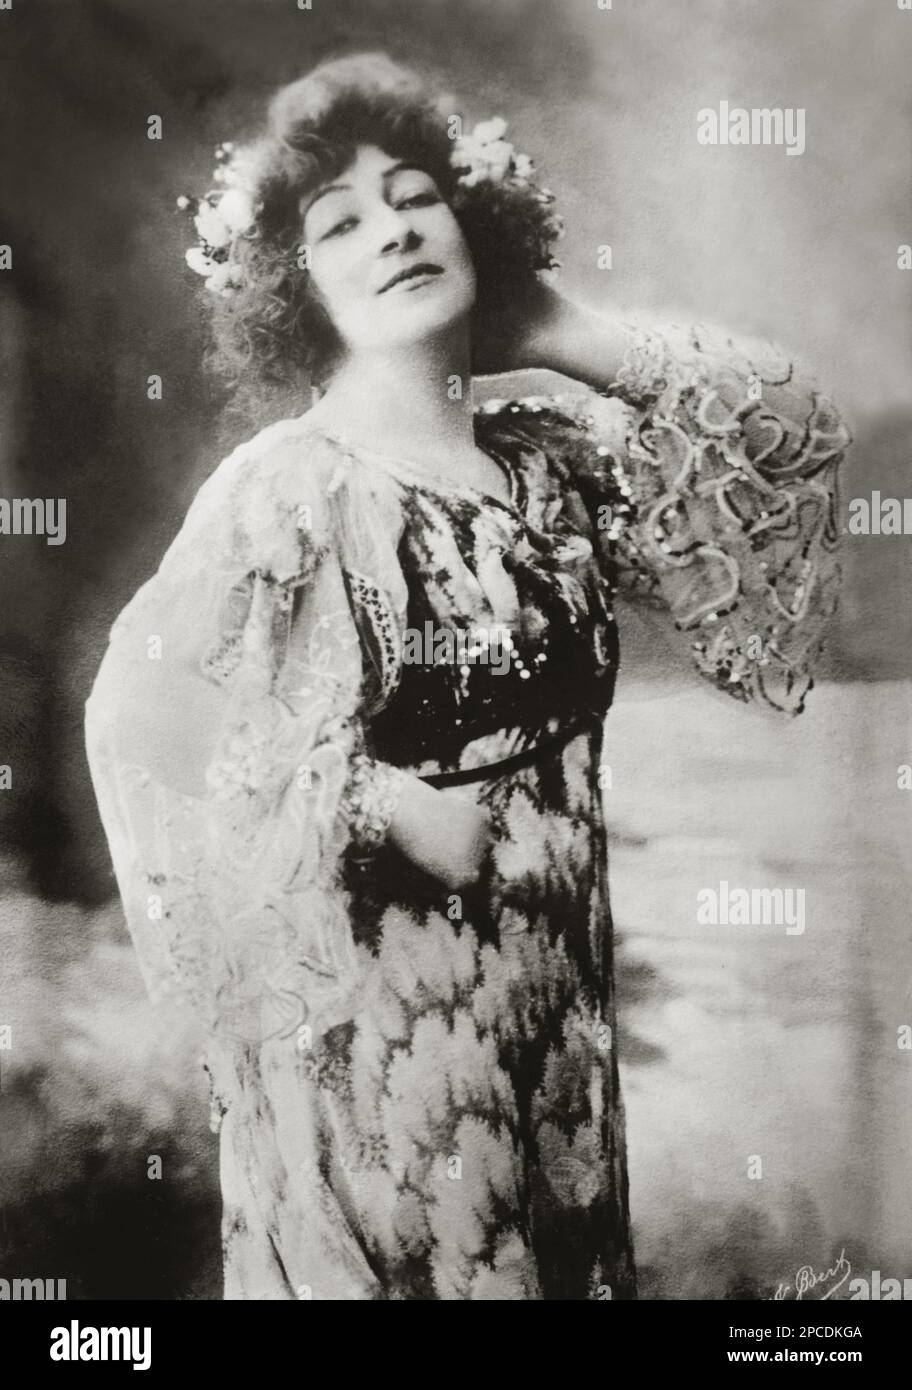 1900 ca, Paris , FRANCE : The celebrated french Opera singer soprano GEORGETTE LEBLANC ( 1875 - 1941 ). Was a French operatic soprano, actress, author, and the sister of novelist Maurice Leblanc (author of Arsene Lupin ). She became particularly associated with the works of Jules Massenet and was an admired interpreter of the title role in Bizet's Carmen . For many years Leblanc was the lover of Belgian playwright and writer Maurice Maeterlinck, and he wrote several parts for her within his stage plays.  - CANTANTE LIRICA - OPERA - MUSICA CLASSICA - classical - portrait - ritratto - OPERA LIRI Stock Photo